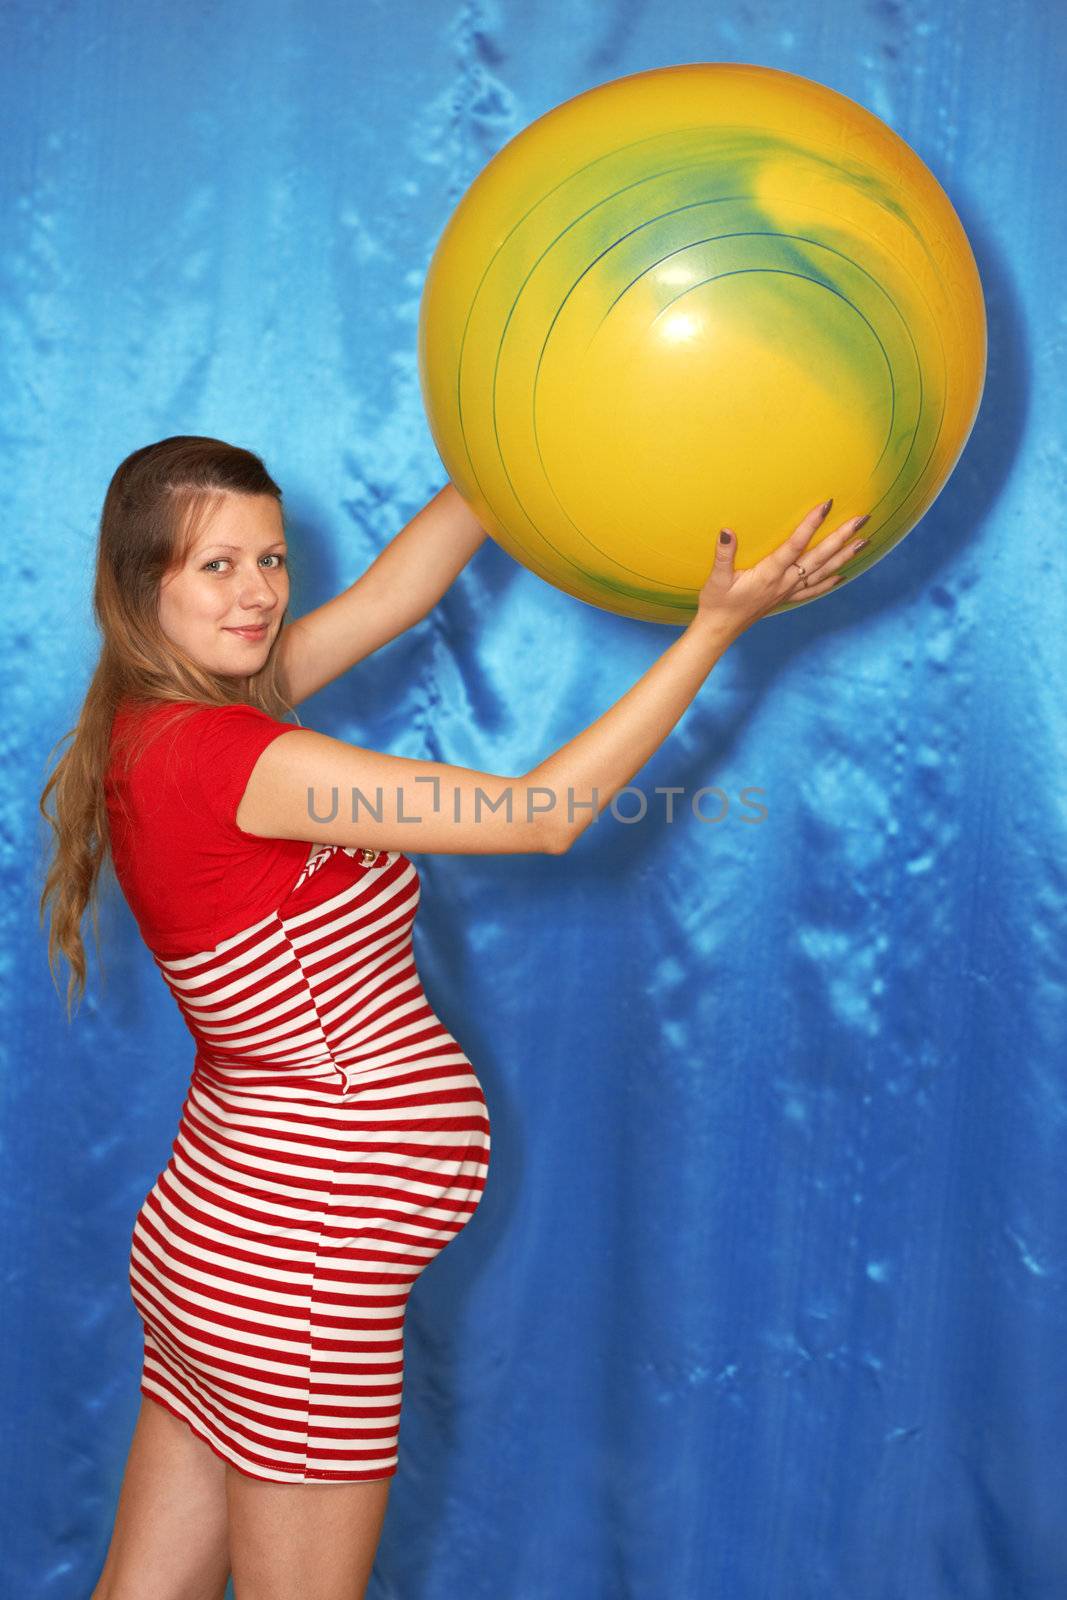 A pregnant woman and yellow ball by petrkurgan